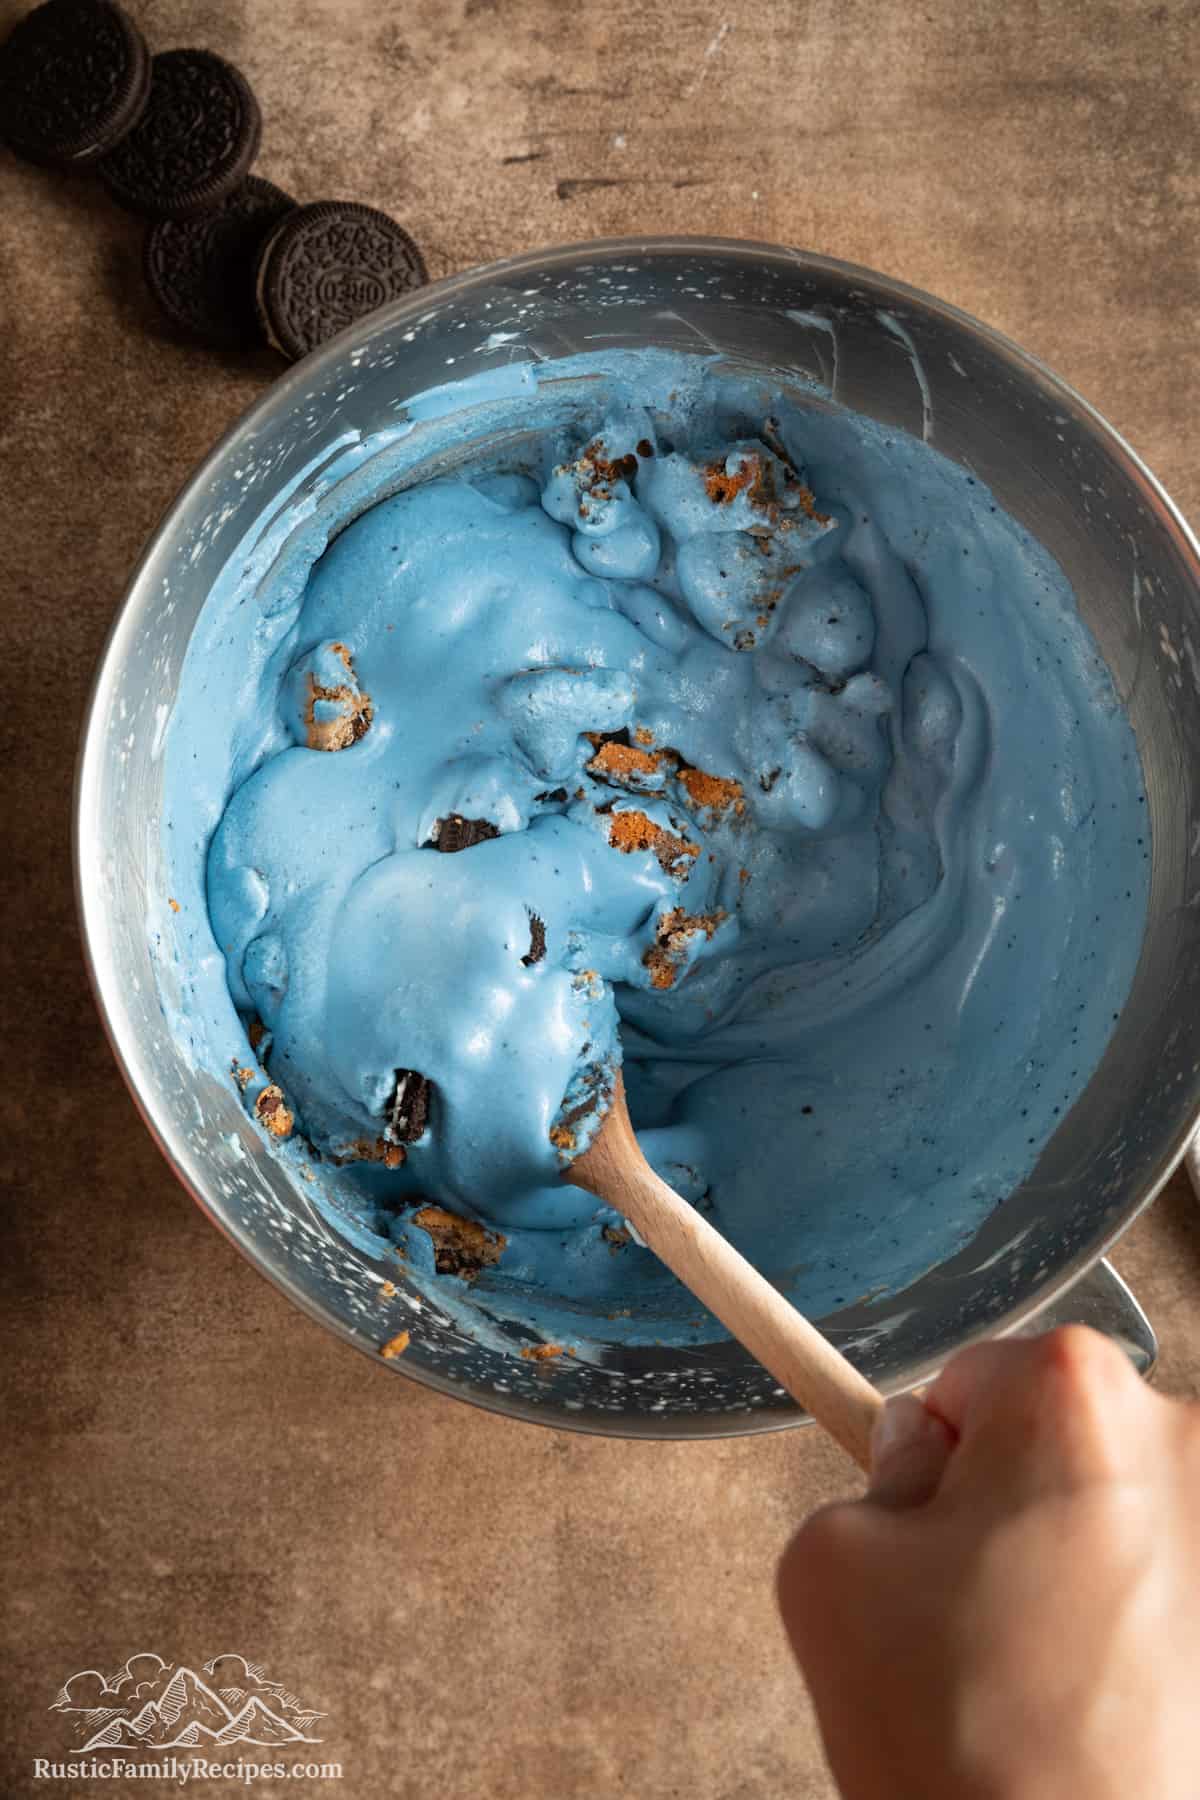 Top view of crumbled chocolate chip cookies and Oreo cookies stirred into blue ice cream with a wooden spoon.